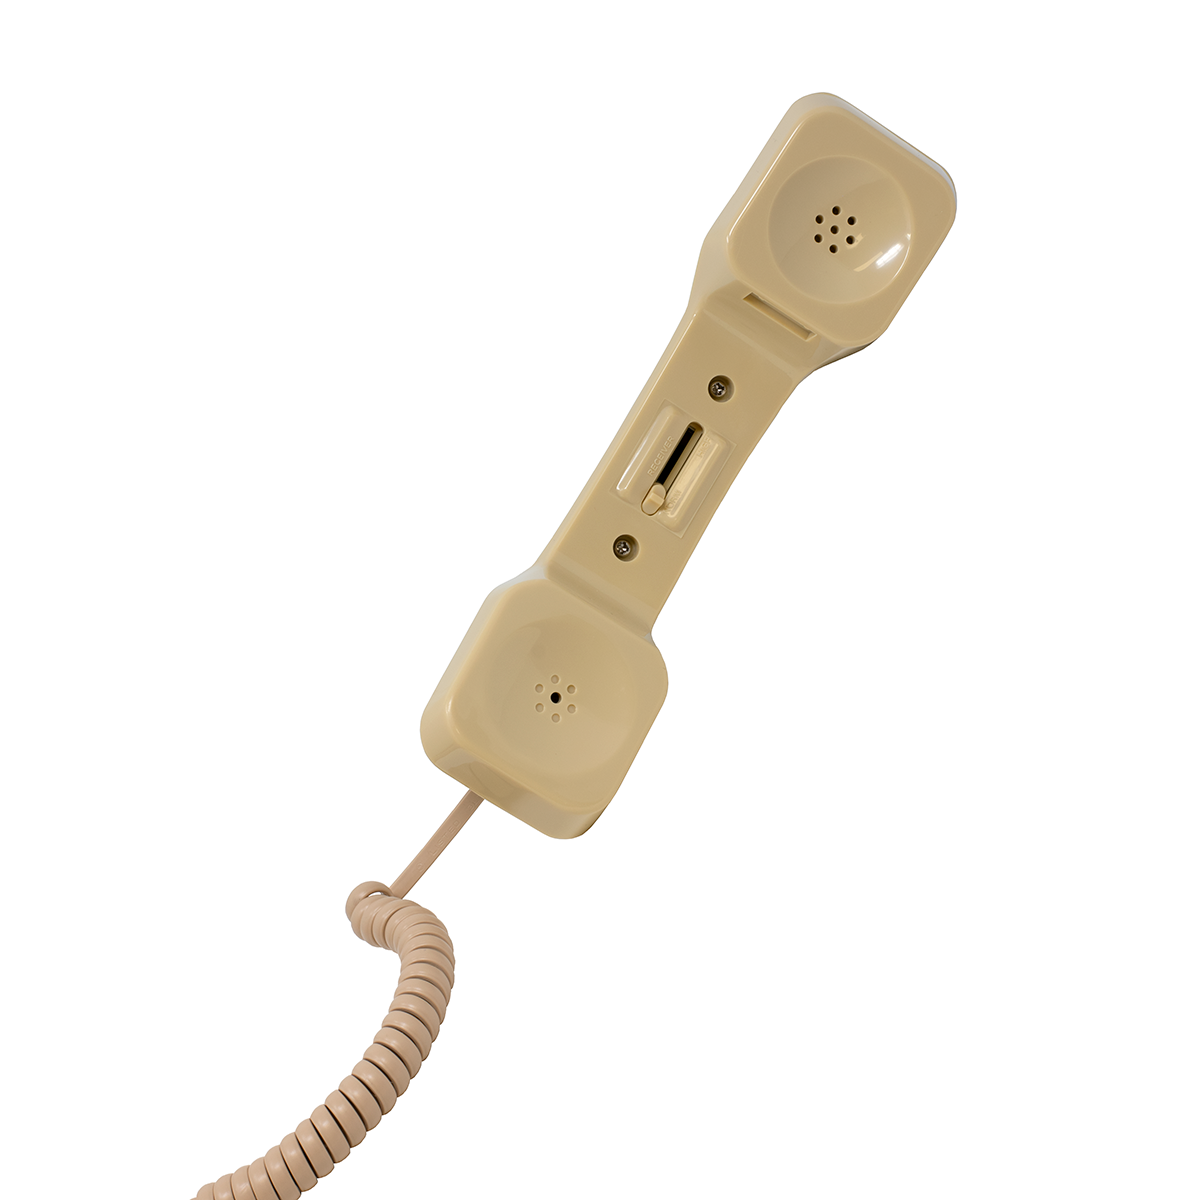 2500 Style Desk Phone No-Dial (Ivory) (Handset View)